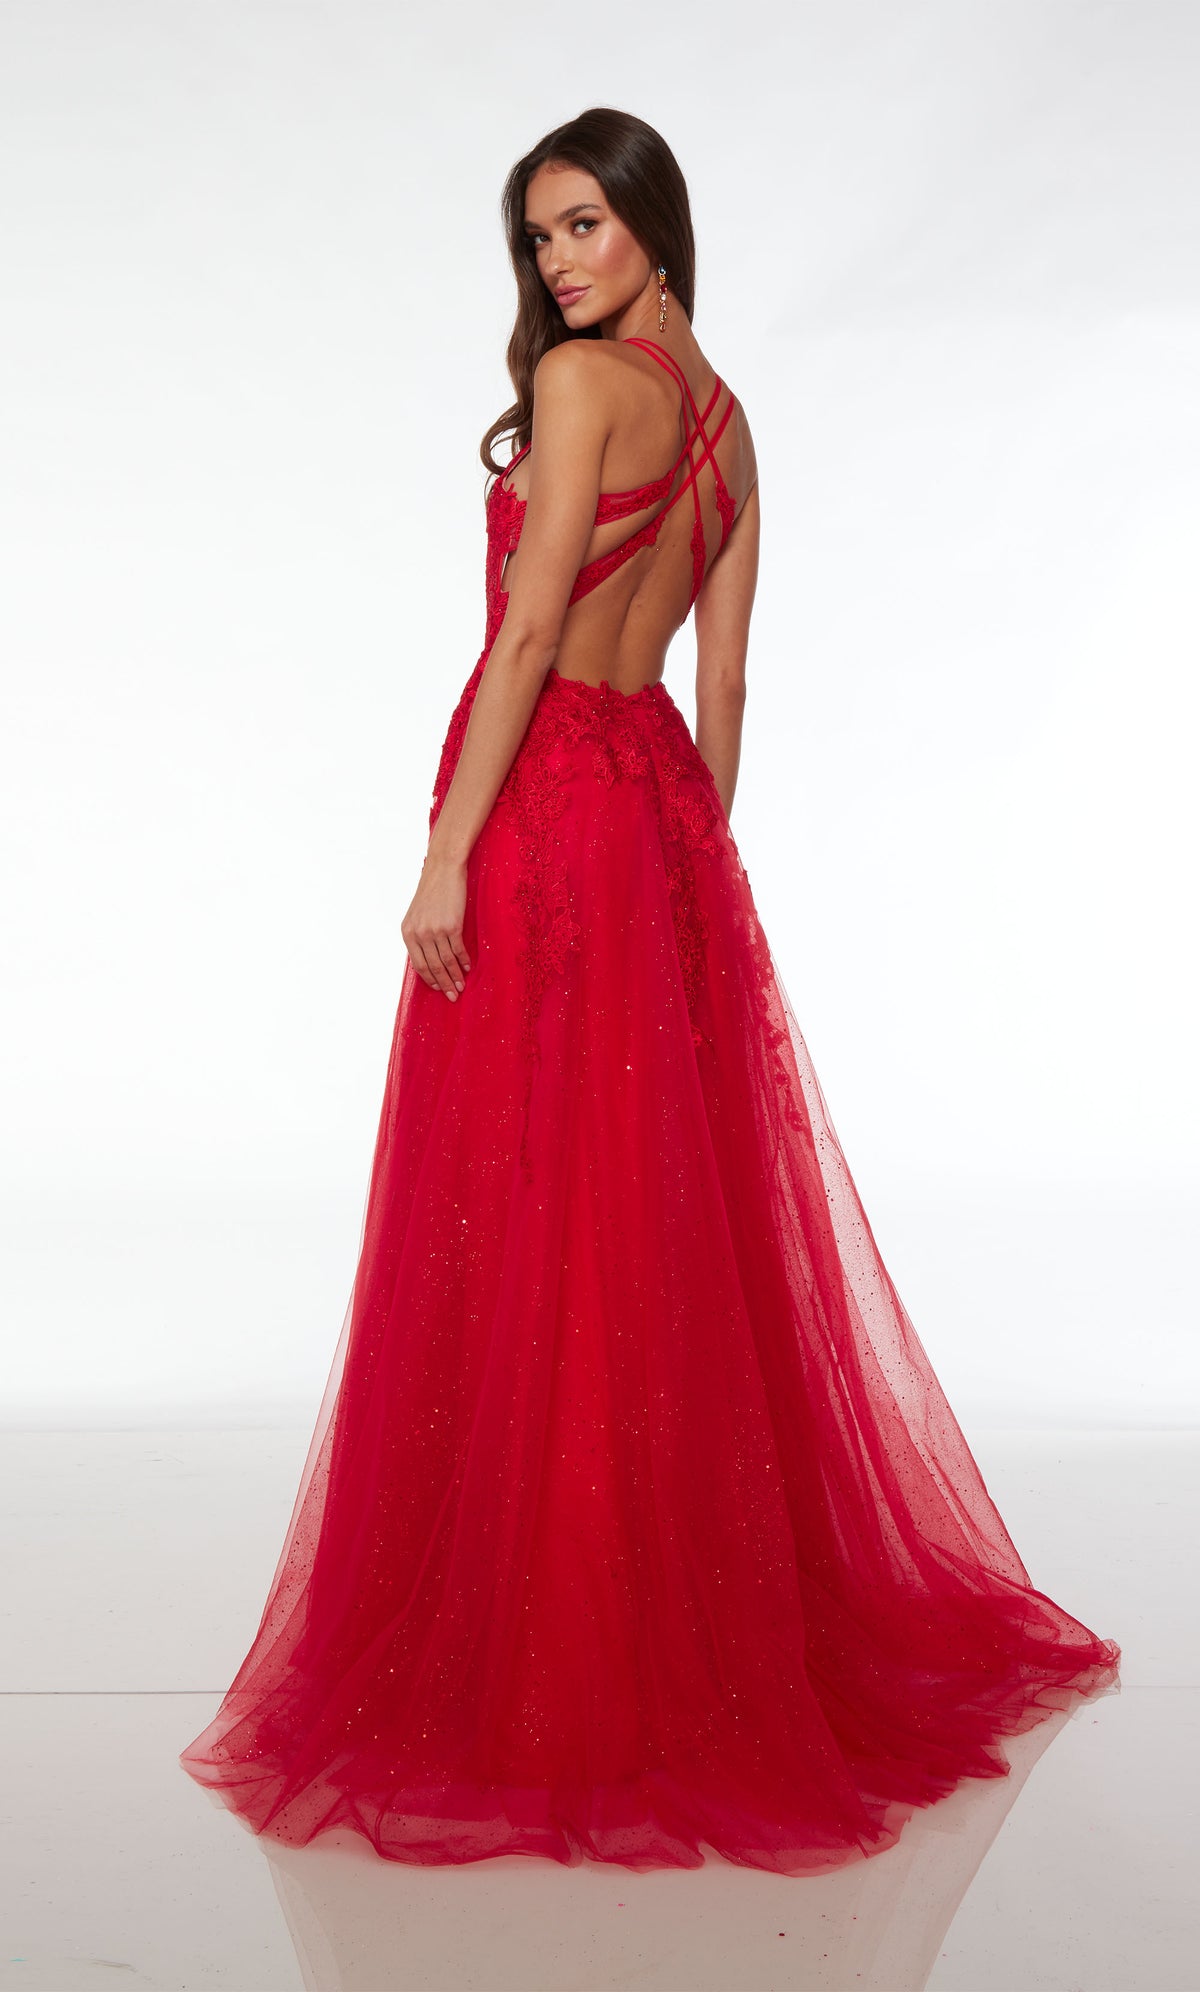 Red prom dress: Plunging corset top, high slit, crisscross strappy back, and train in glitter tulle fabric. Floral lace appliques strategically placed for the perfect touch.